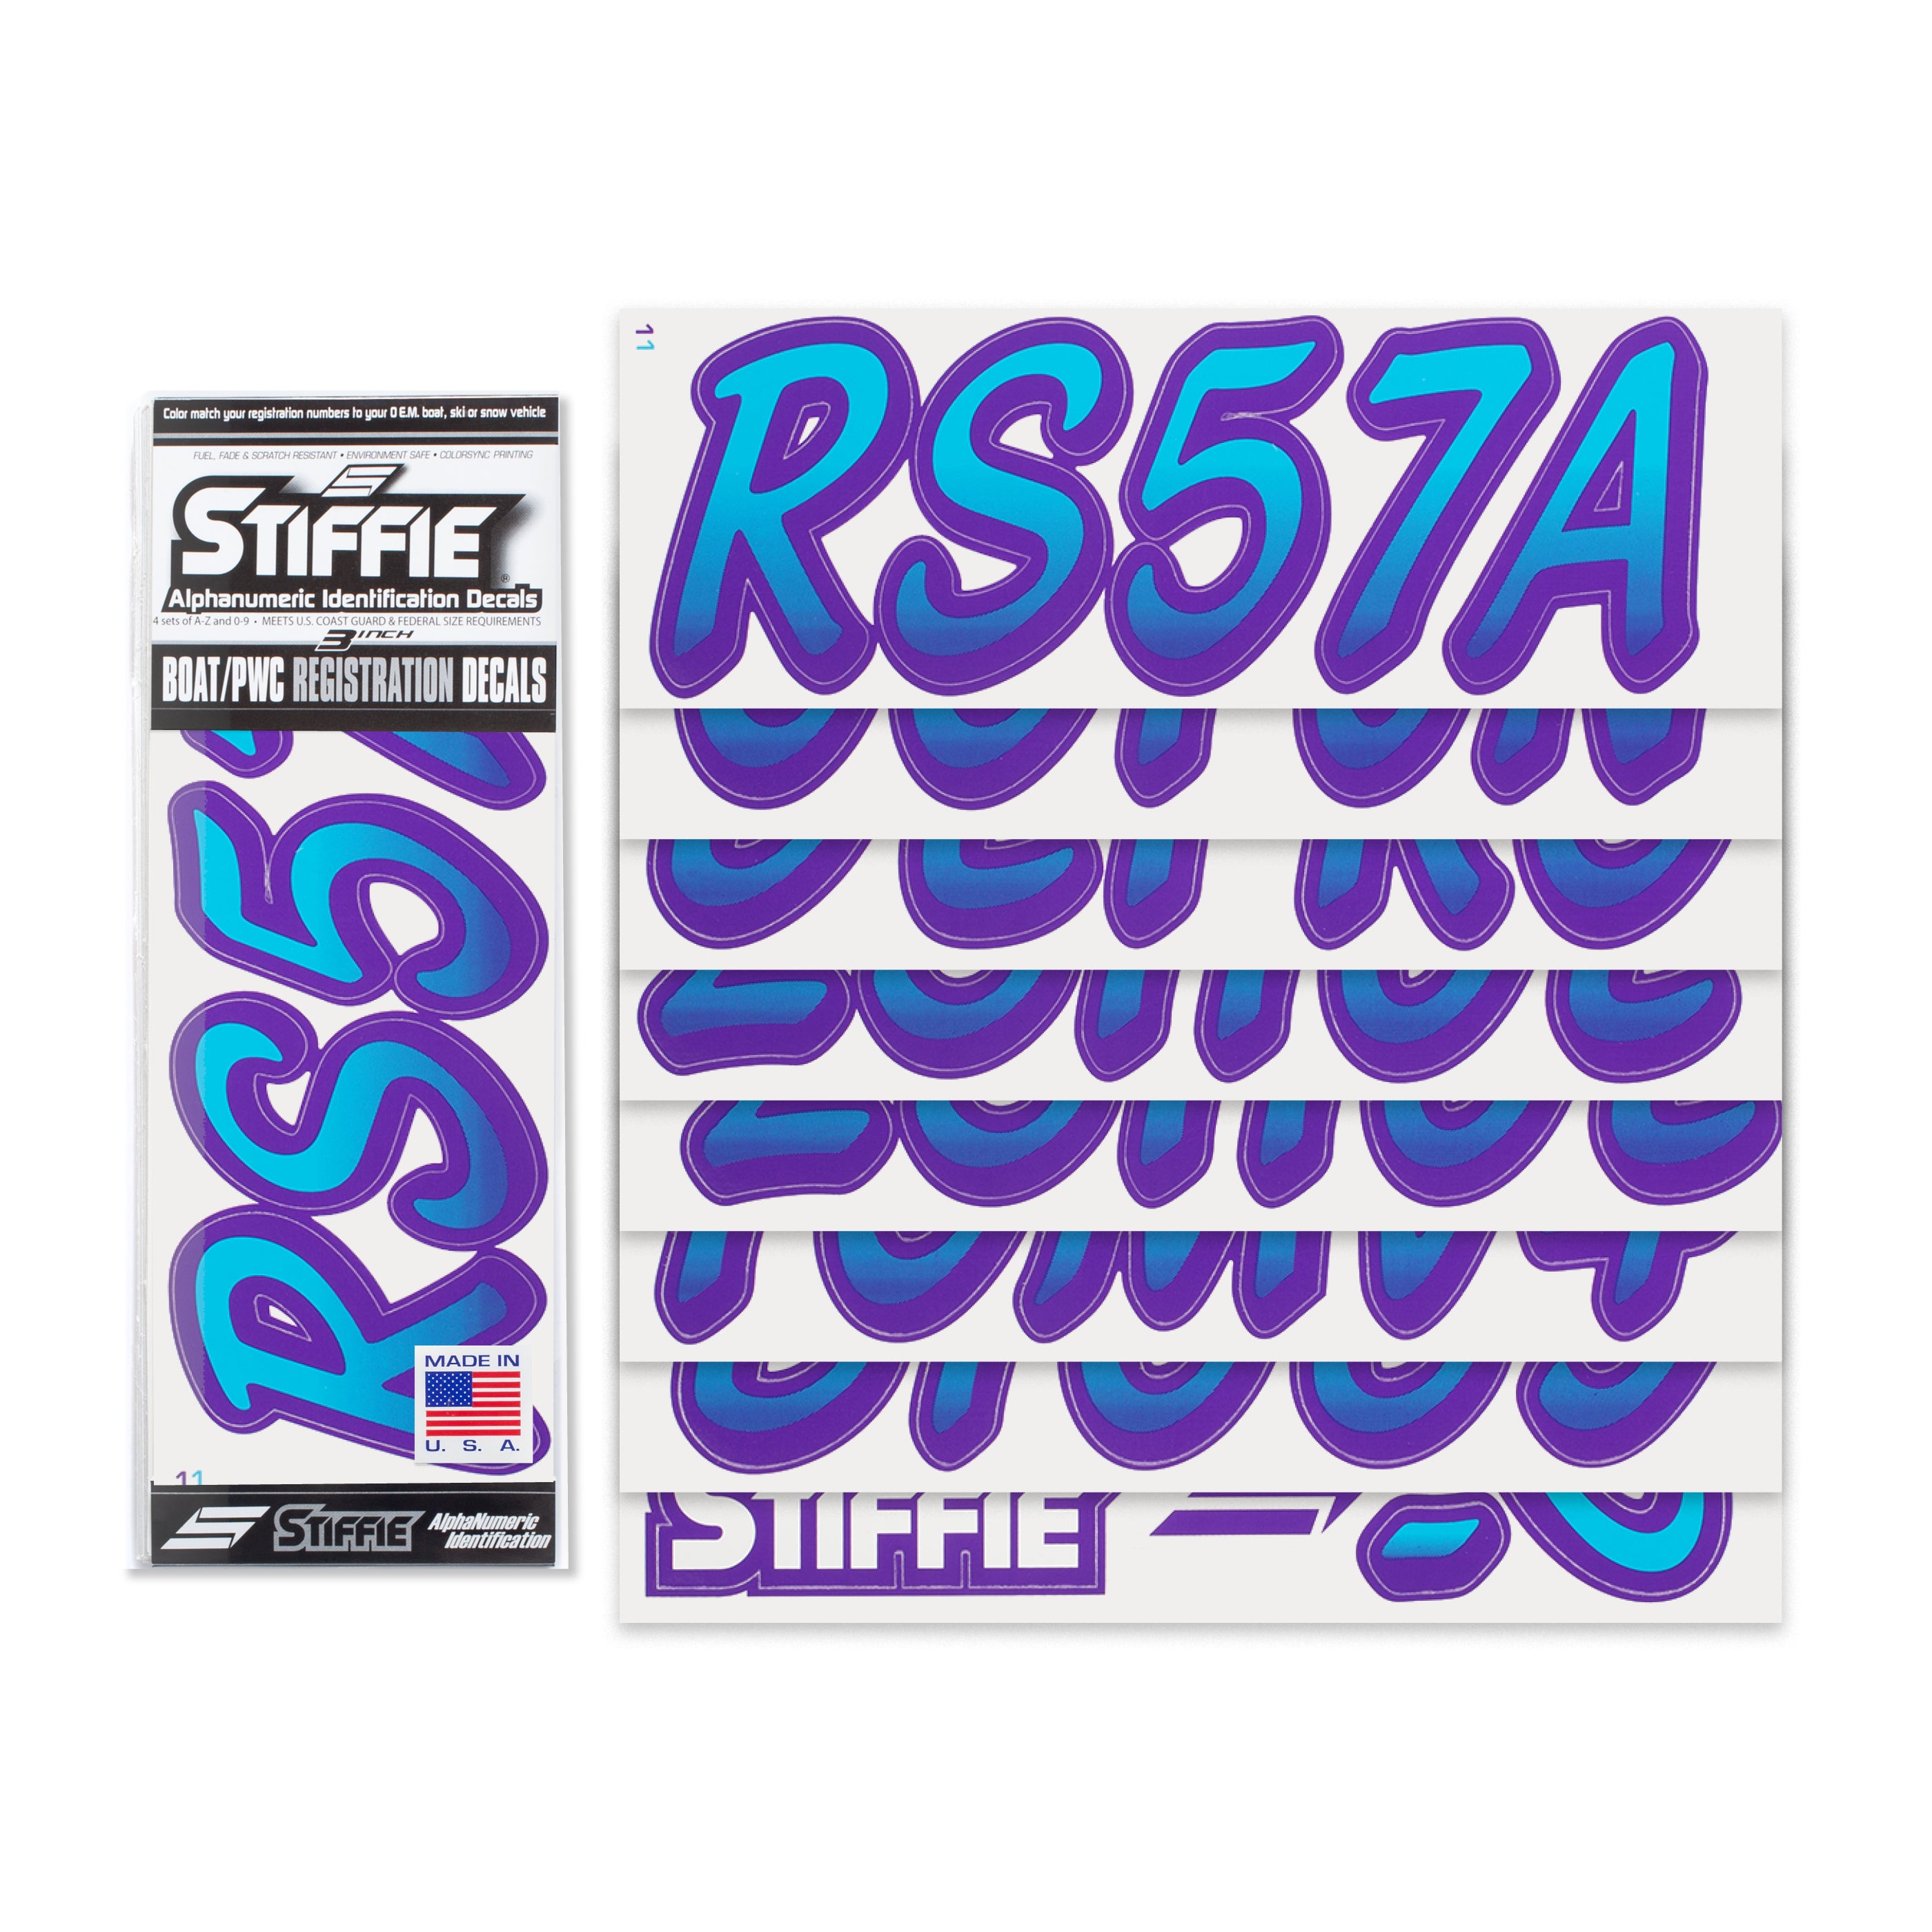 STIFFIE Whipline Sky Blue/Purple 3" Alpha-Numeric Registration Identification Numbers Stickers Decals for Boats & Personal Watercraft